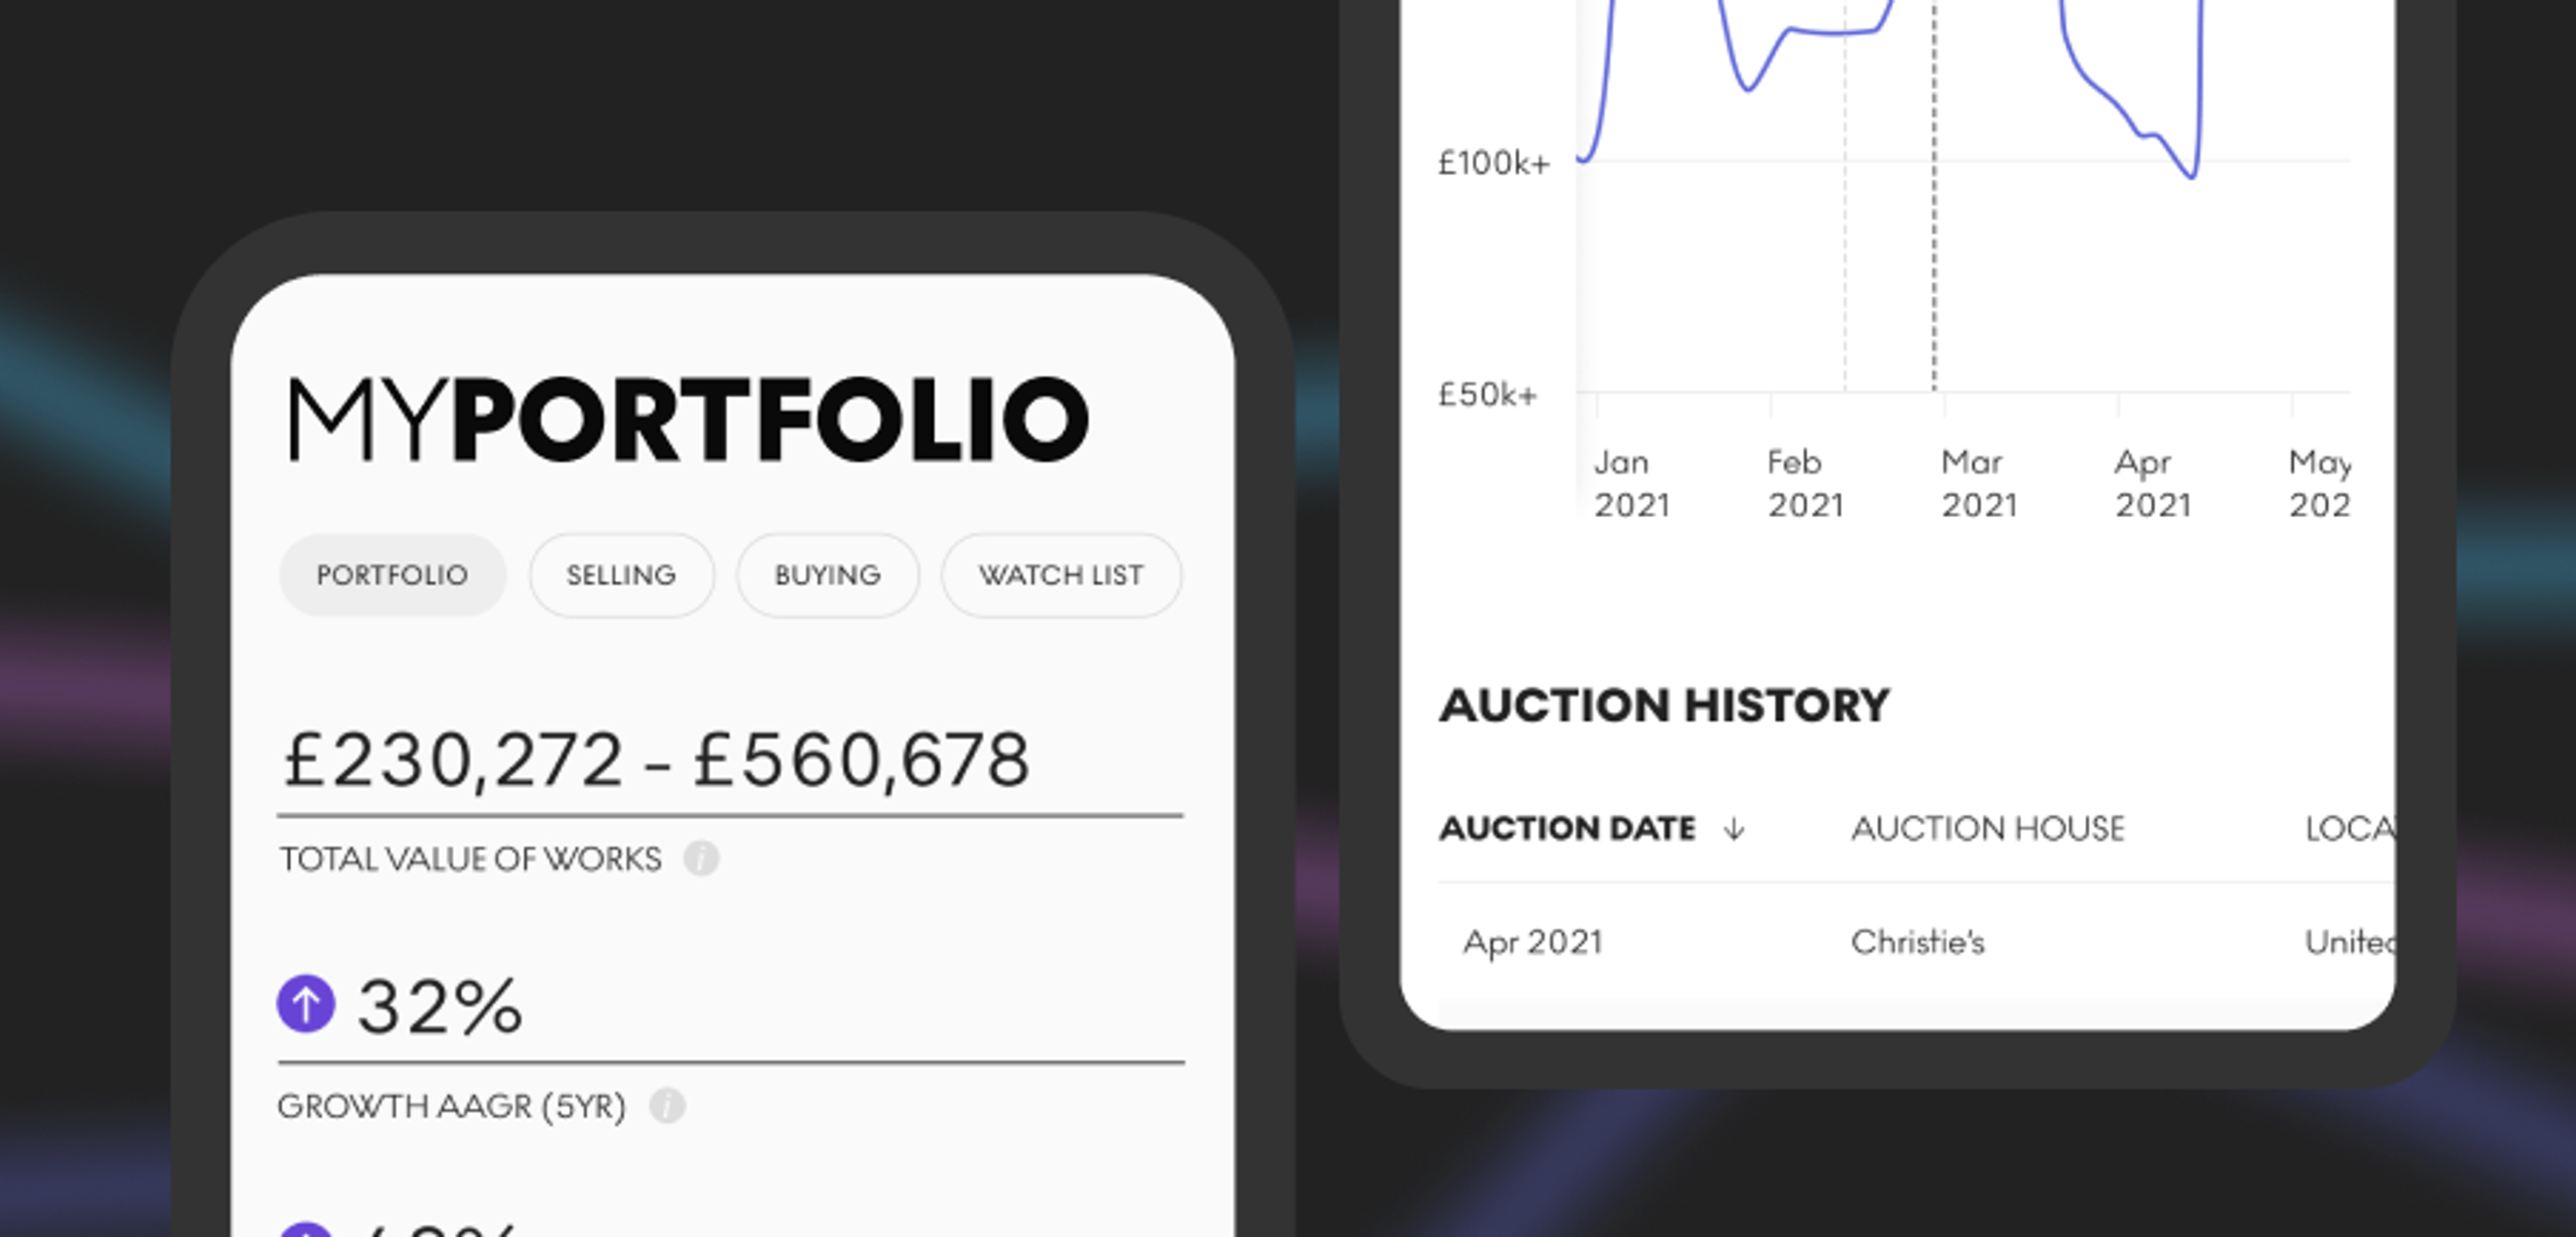 A graphic of two phone screens. The first phone screen shows the dashboard for MyPortfolio, with an exemplar portfolio. The screen shows the total value of artworks in the portfolio: £230,272-£560,678 and the Growth AAGR: 32%. On the second phone screen, a graph shows the value growth of an artwork over a 5-year period, and the auction history of that artwork.